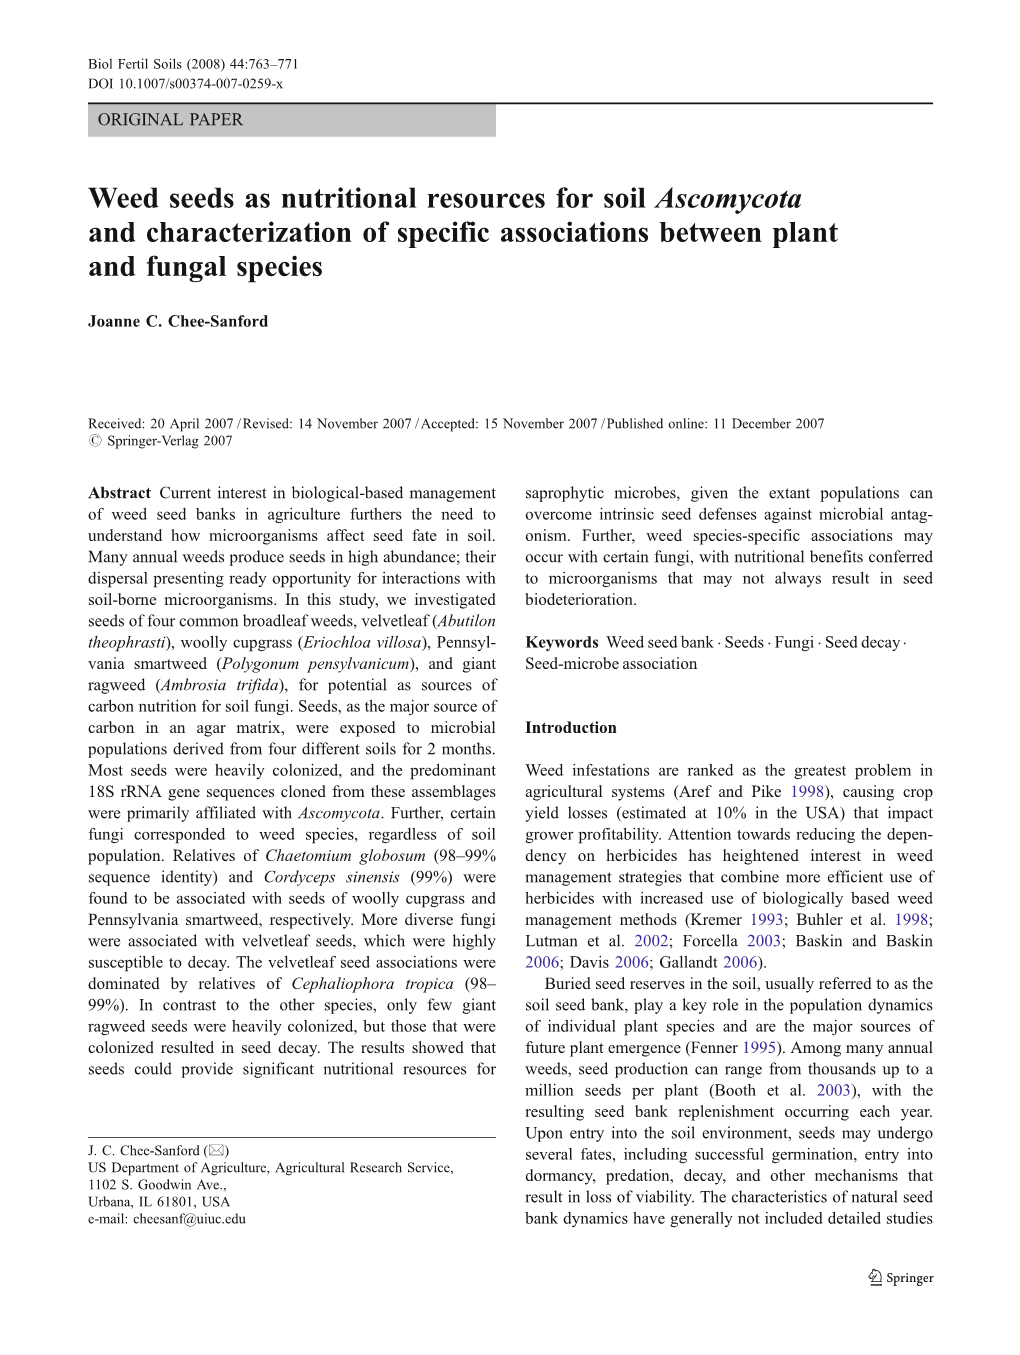 Weed Seeds As Nutritional Resources for Soil Ascomycota and Characterization of Specific Associations Between Plant and Fungal Species